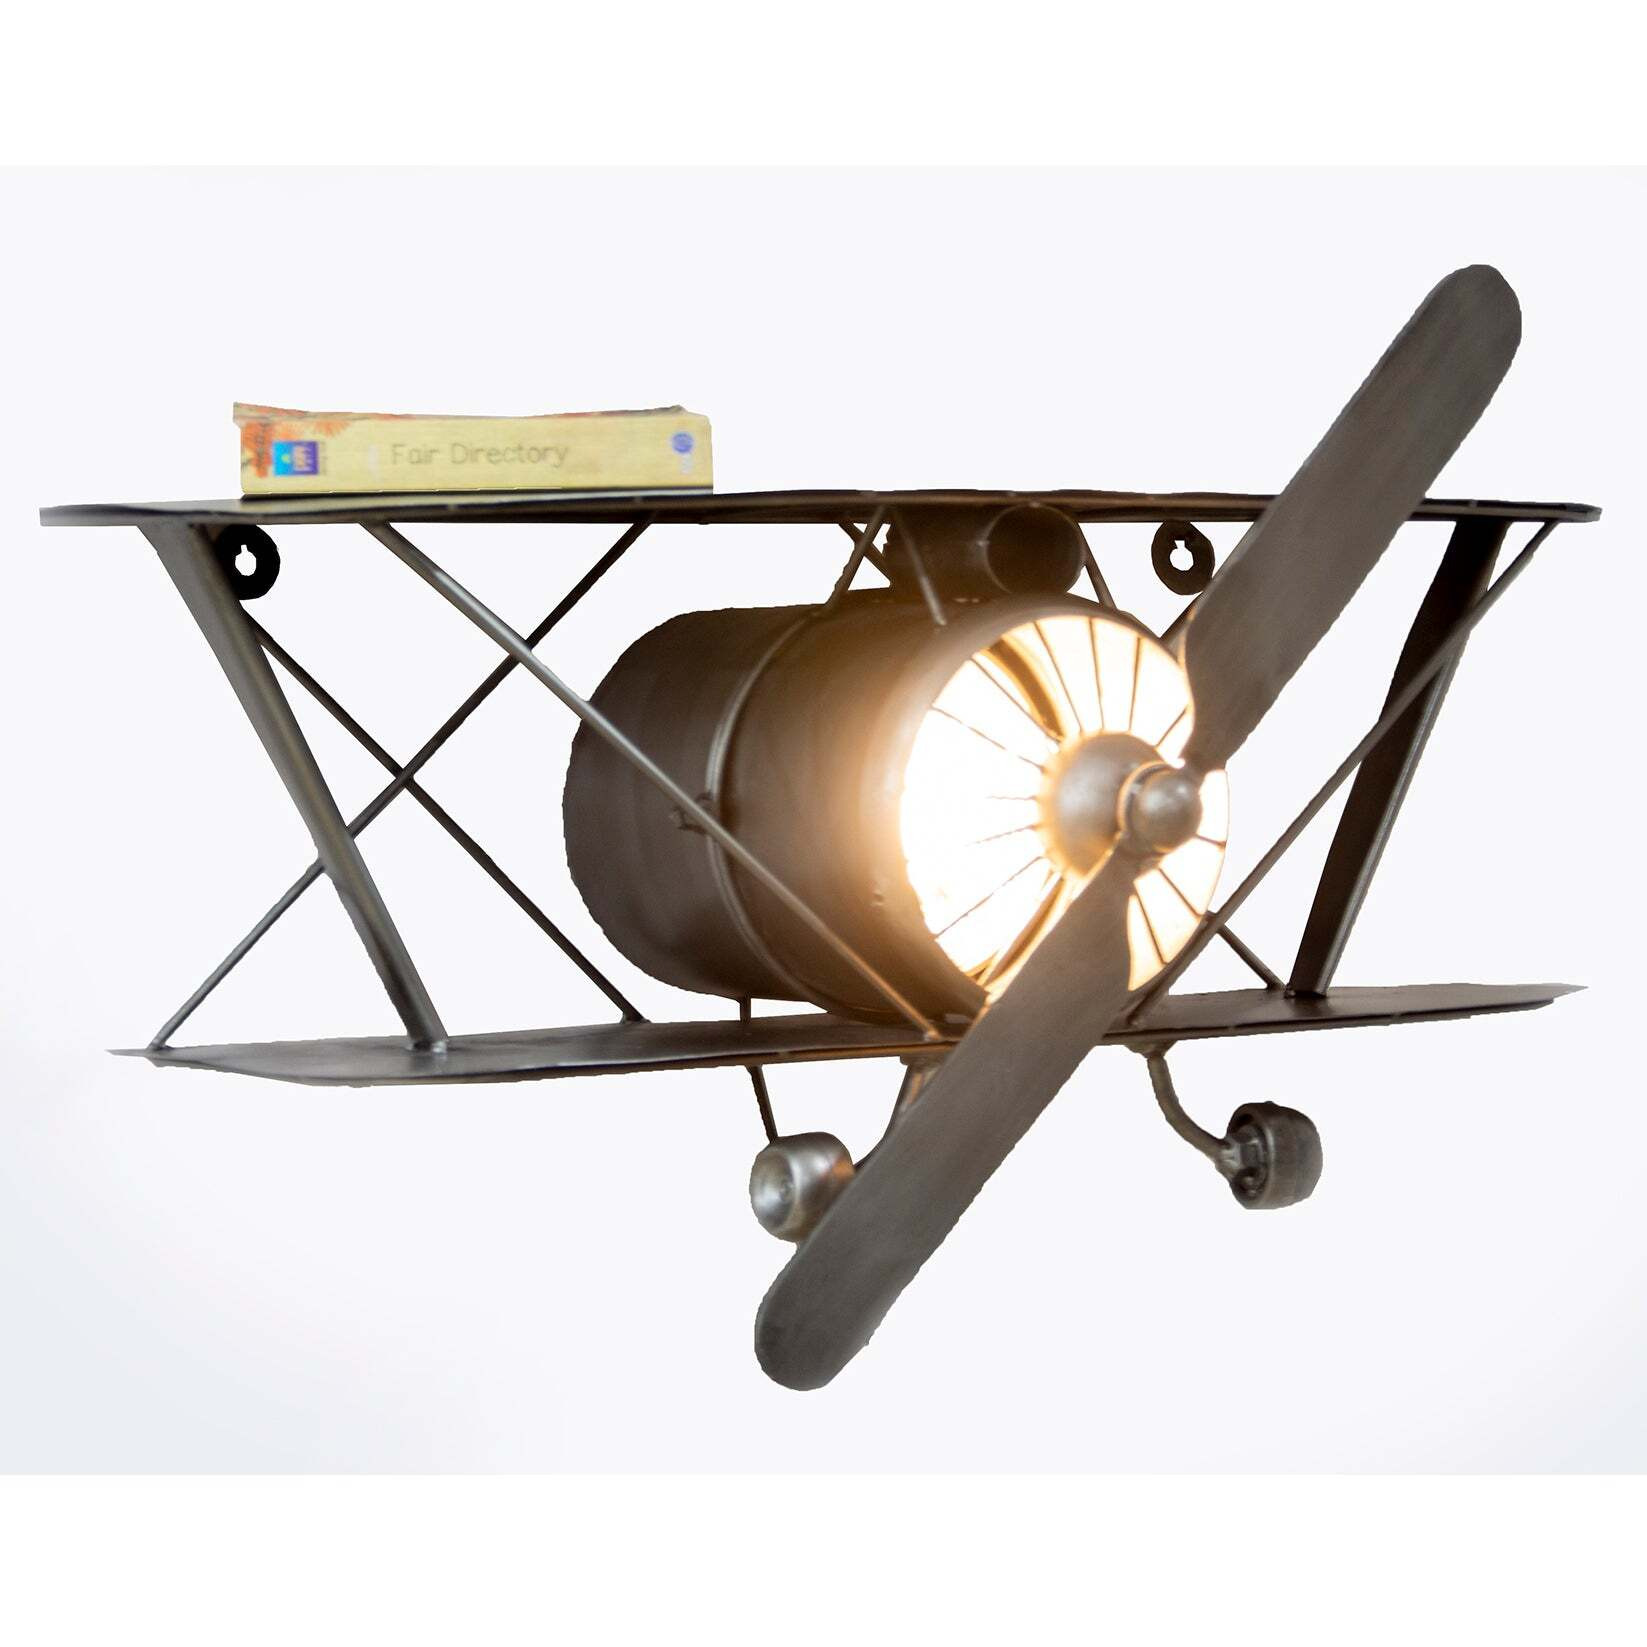 Propelled Biplane Wall Shelf with Light - image 1